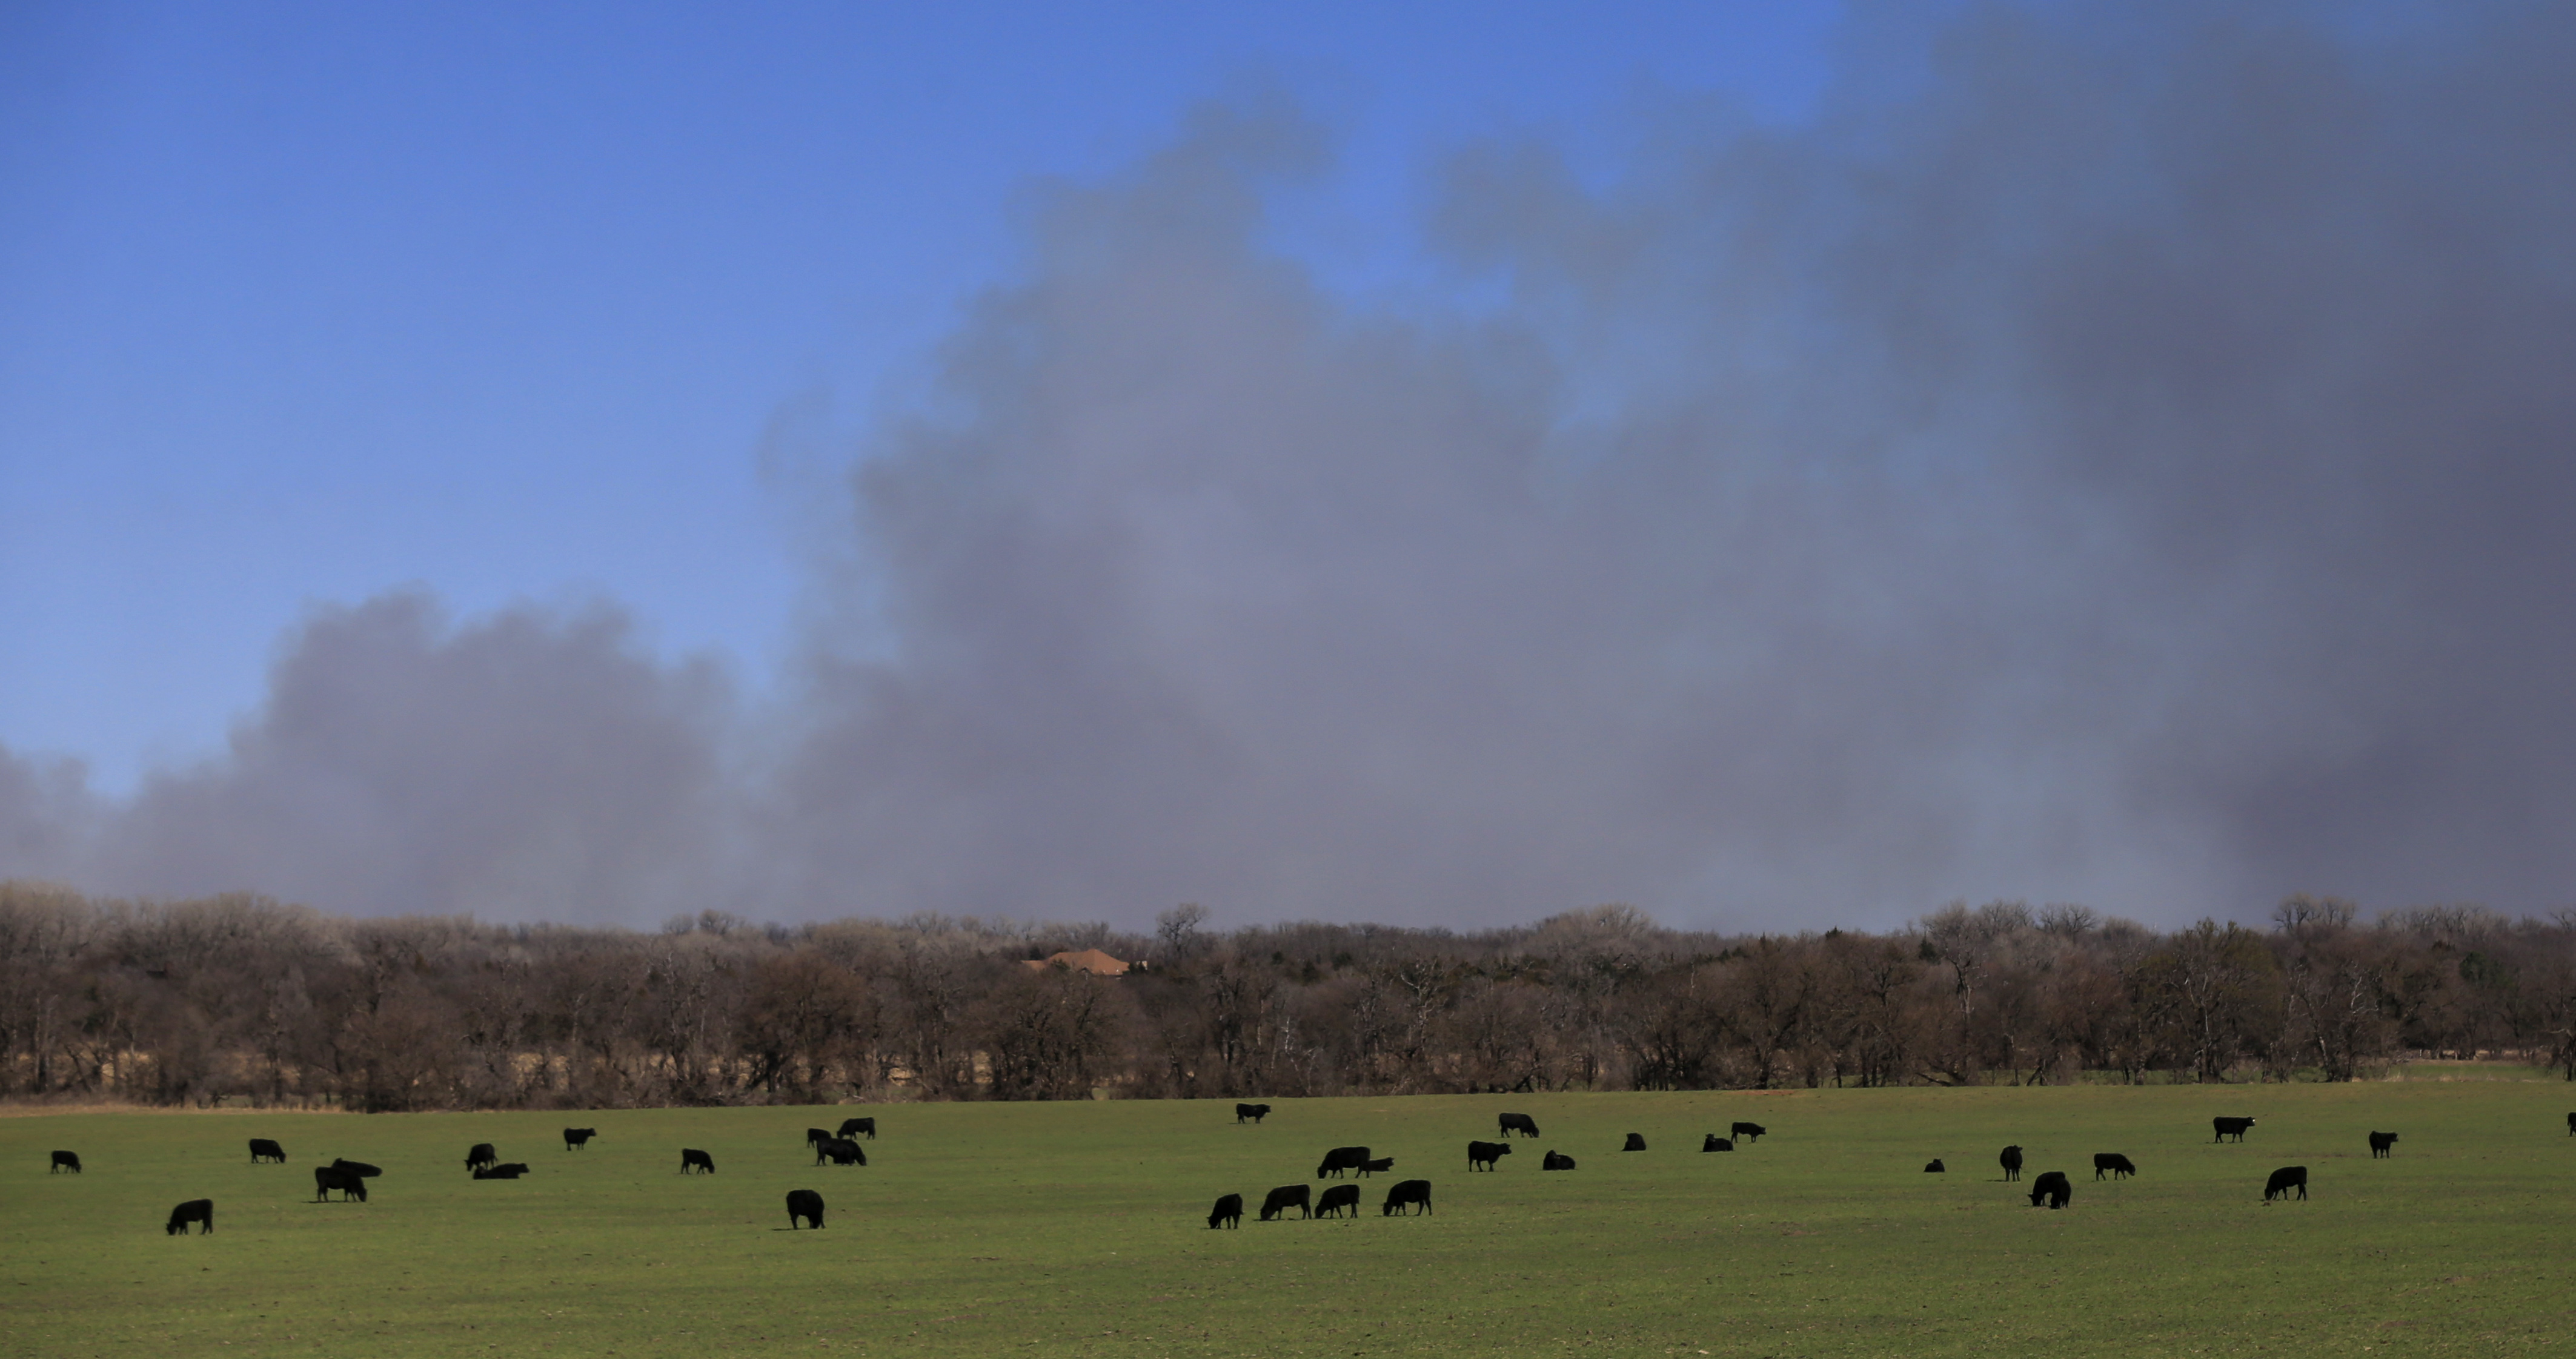 Cattle graze with a background of smoke from wildfires near Hutchinson, Kan., Tuesday, March 7, 2017.  Fires raged in parts of Kansas, Oklahoma, Texas and Colorado.  Photo:  Orlin Wagner | AP.